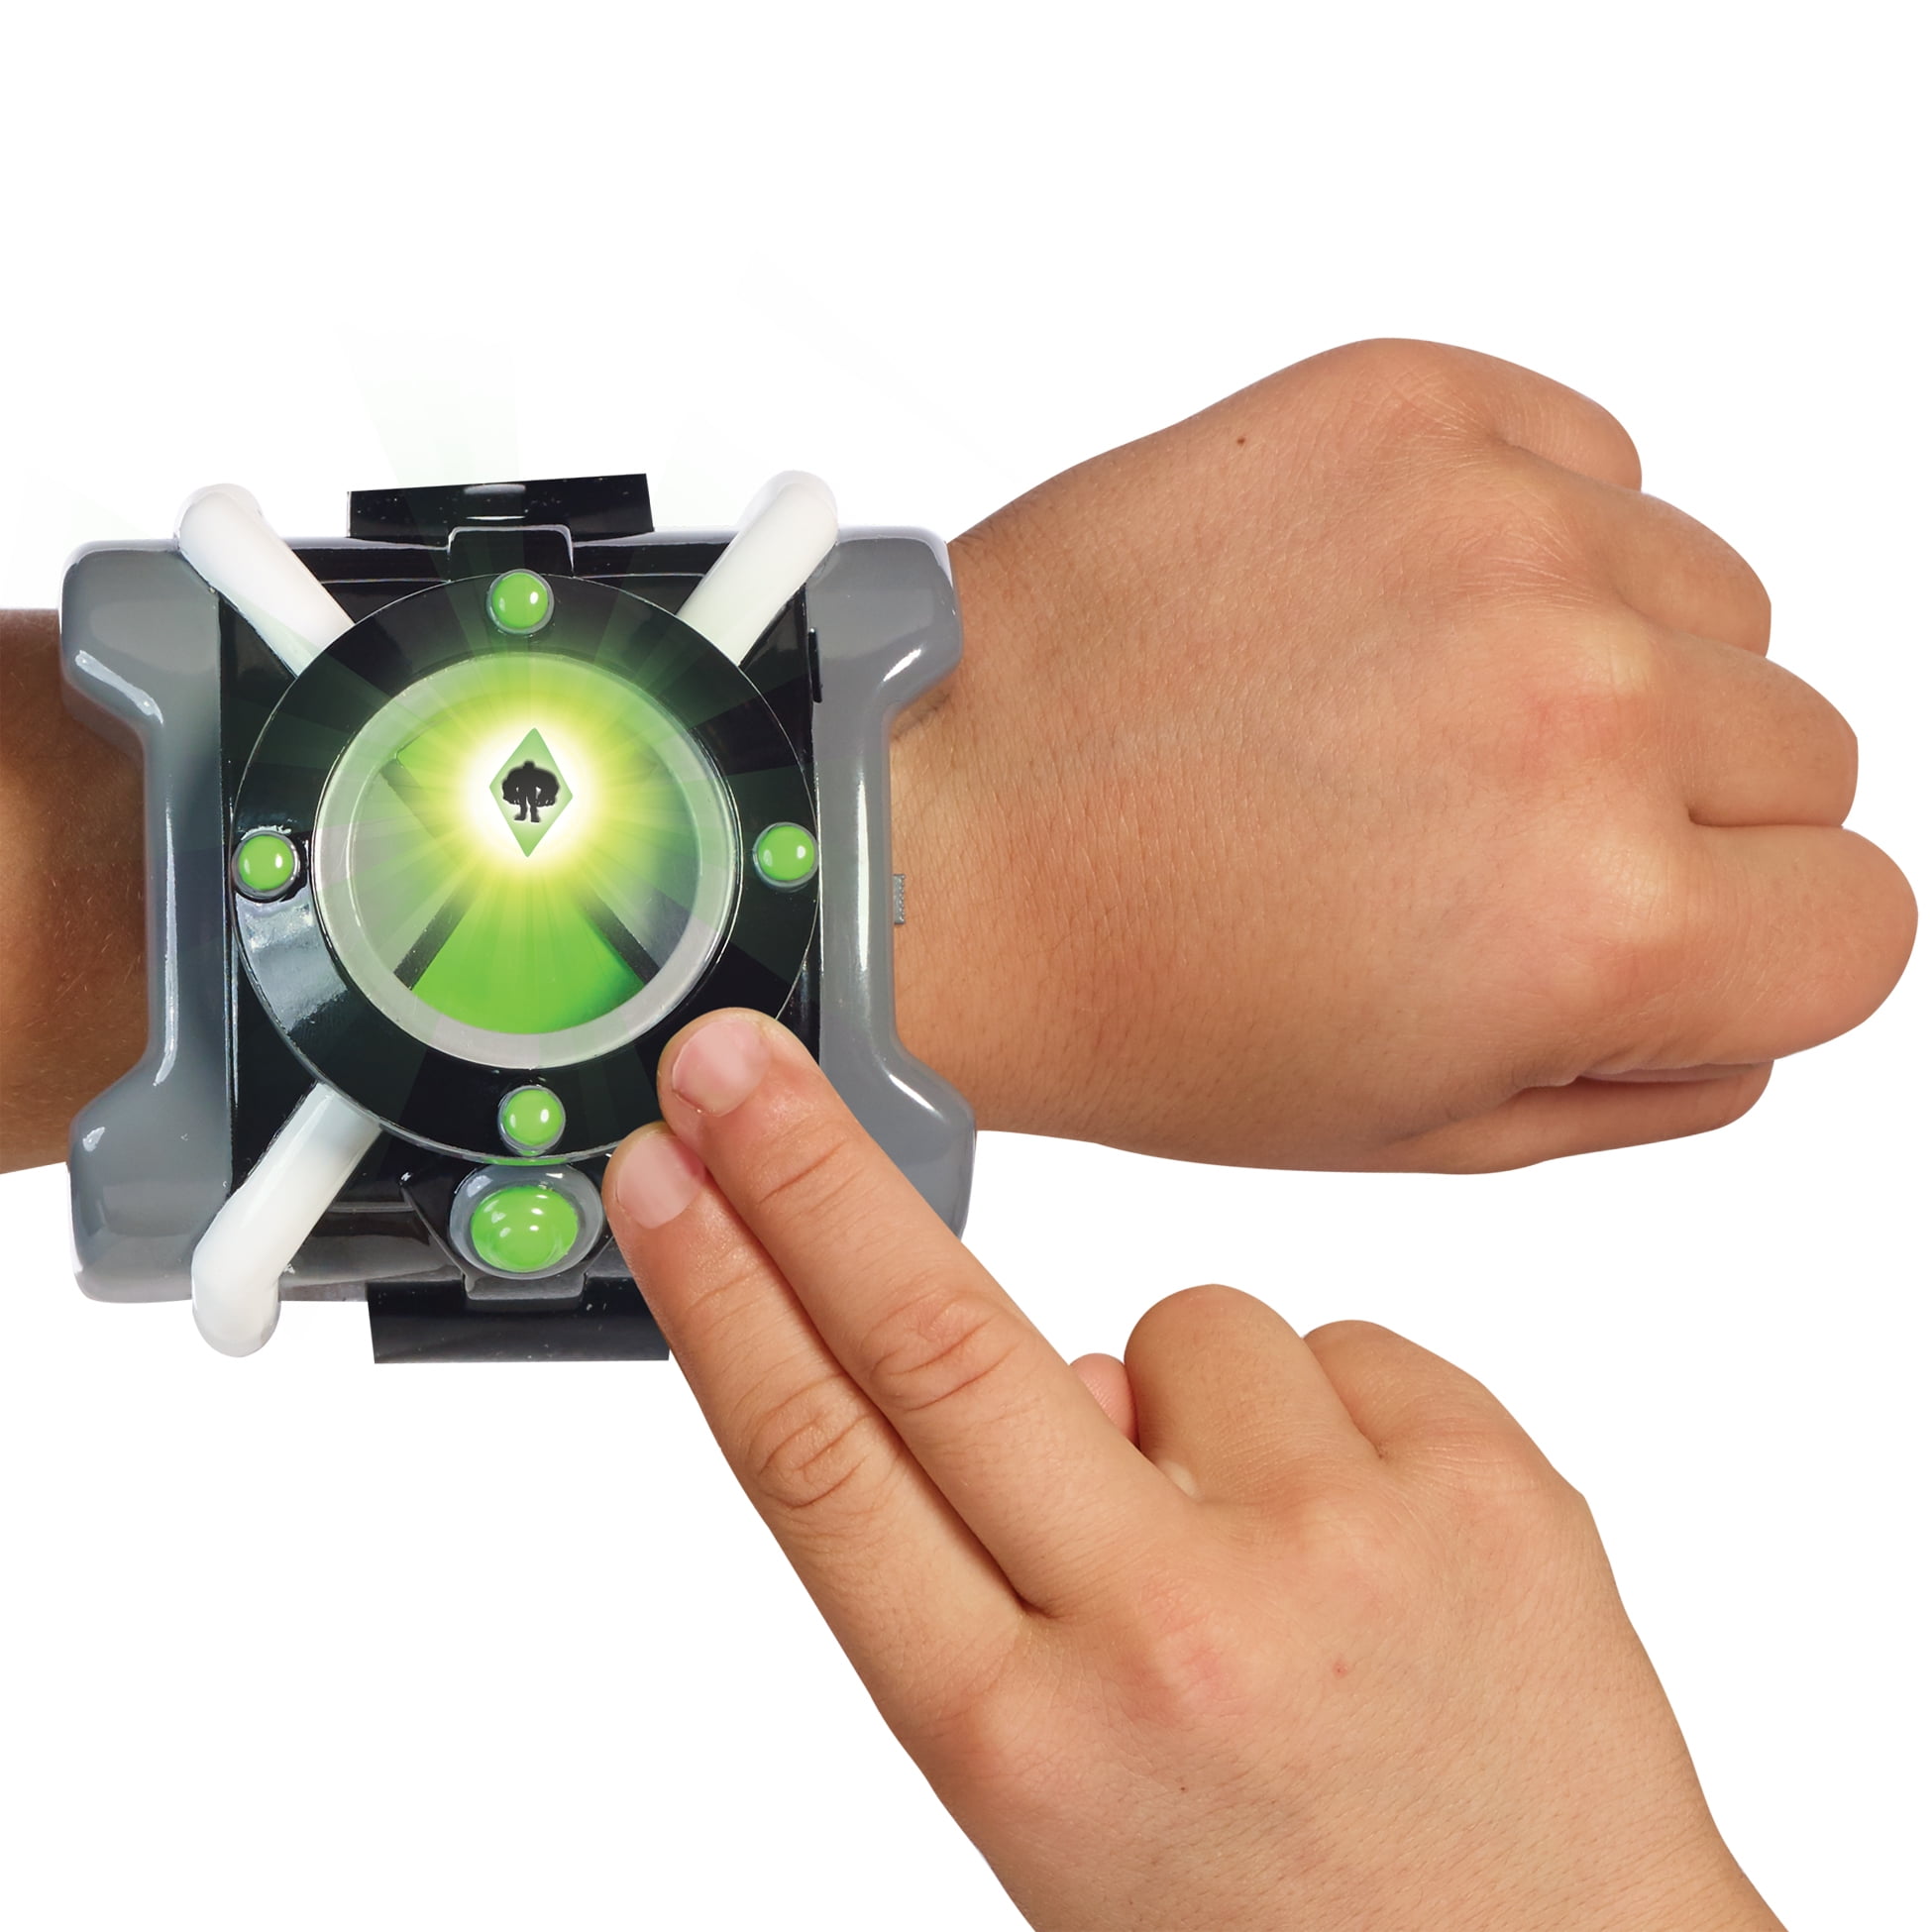 2007 WORKING Playmates Ben 10 Omnitrix FX Watch Deluxe Toy Sounds And  Lights | eBay